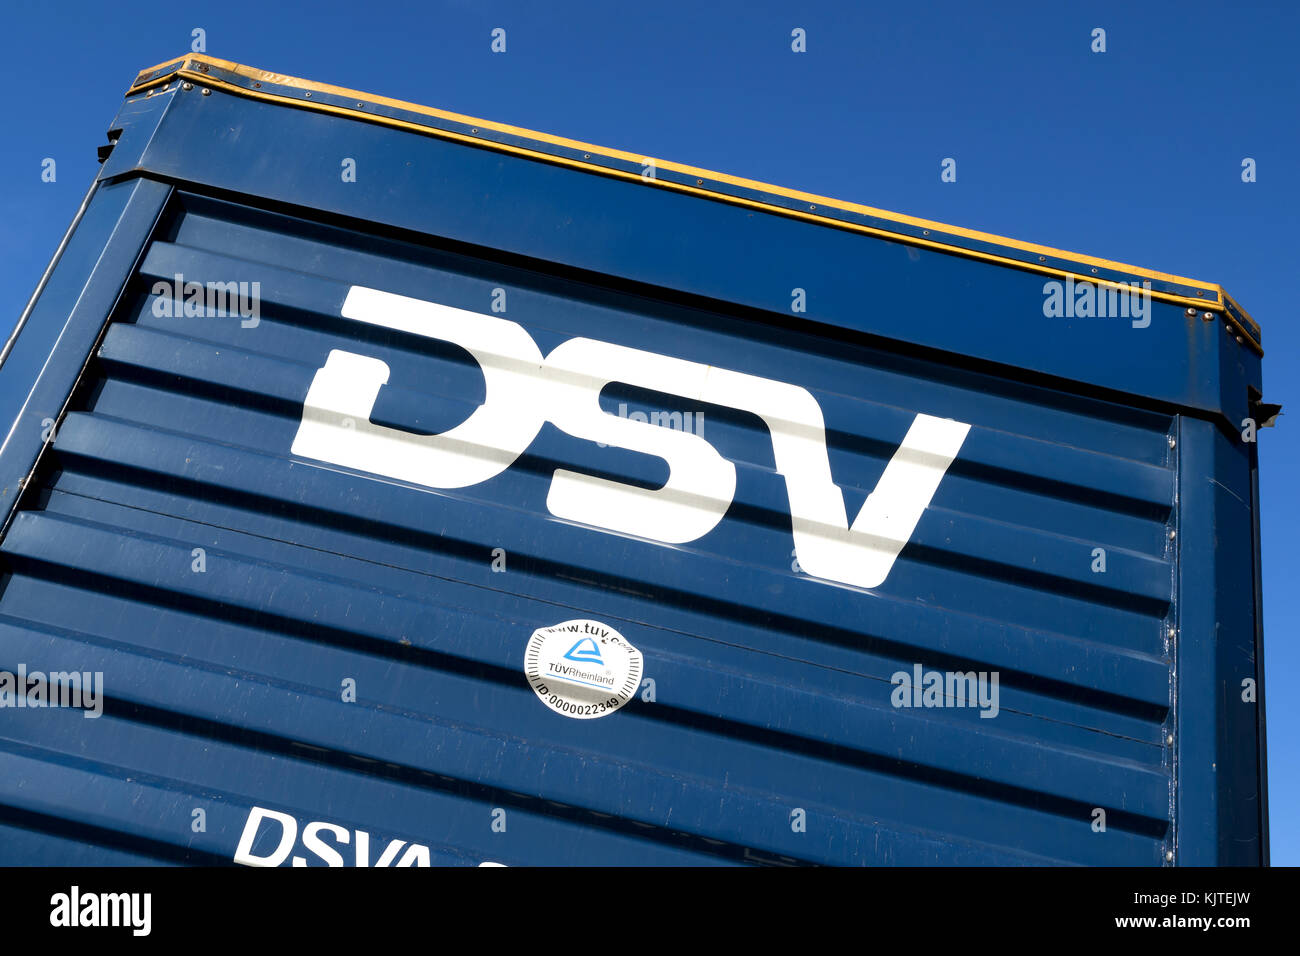 DSV curtain side trailer. DSV A/S is a Danish transport and logistics company offering transport services worldwide by road, air, sea and train. Stock Photo